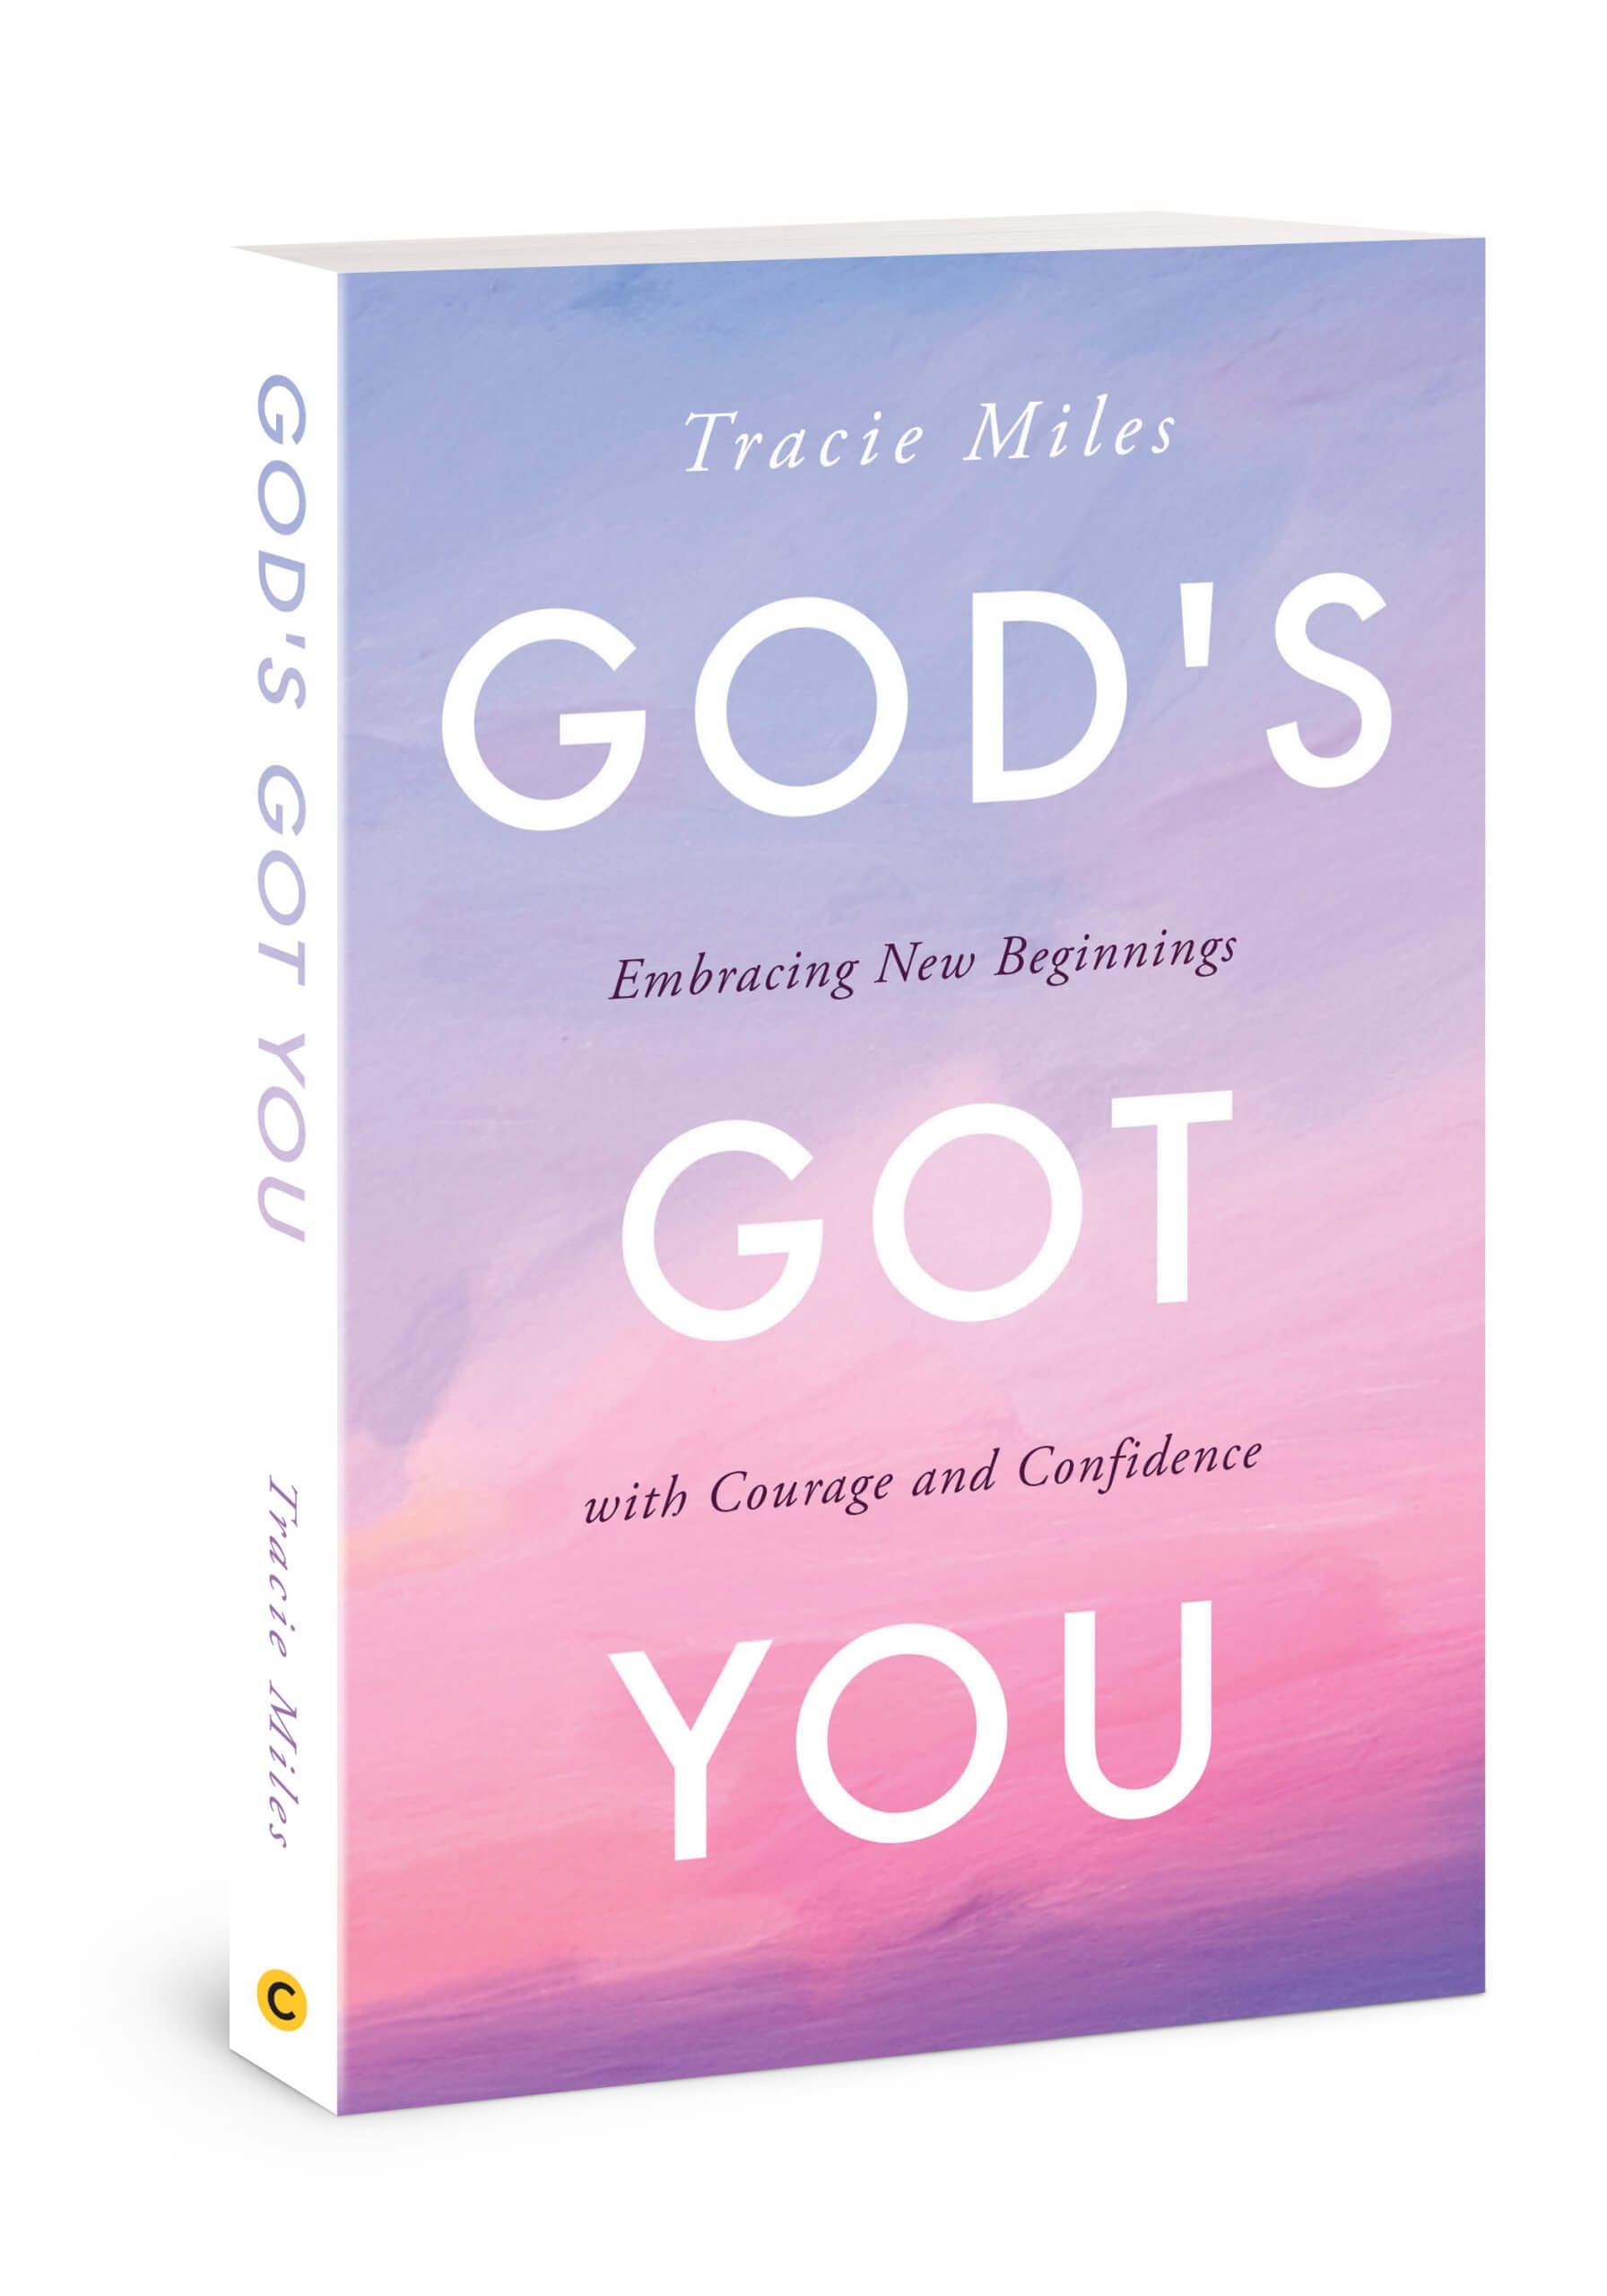 God’s Got You: Embracing New Beginnings with Courage and Confidence